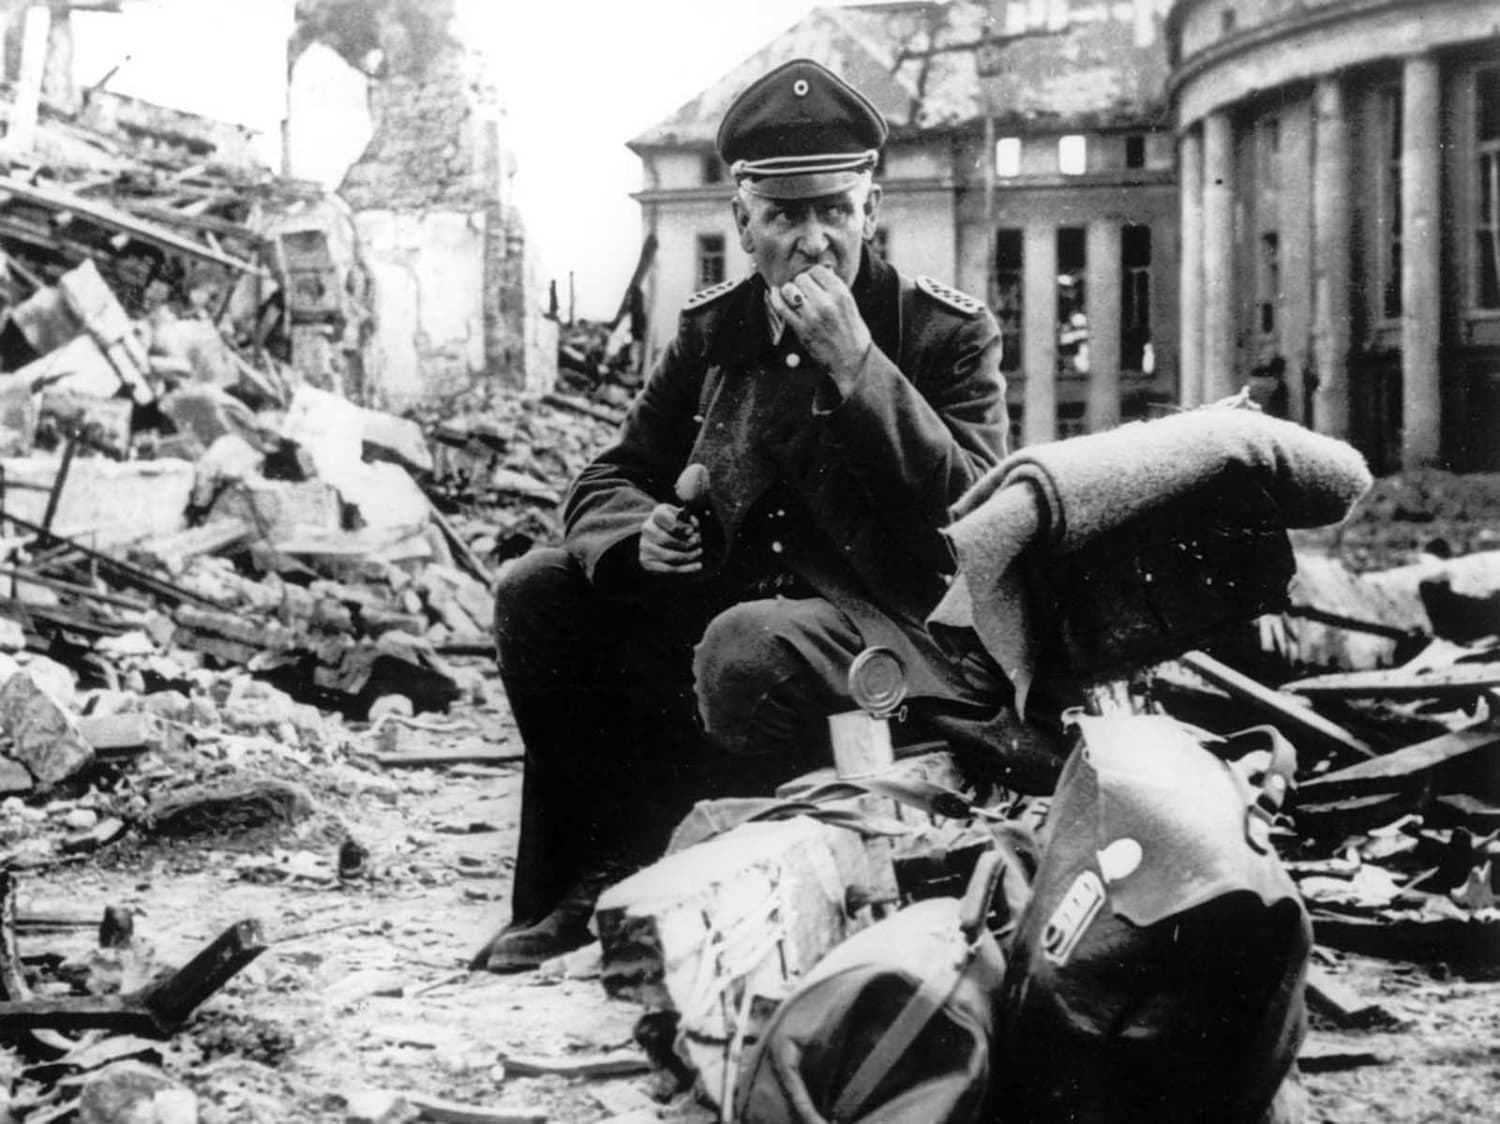 A German officer eats C-rations as he sits amid the ruins of Saarbrücken, a German city and stronghold along the Siegfried Line, in early spring of 1945.